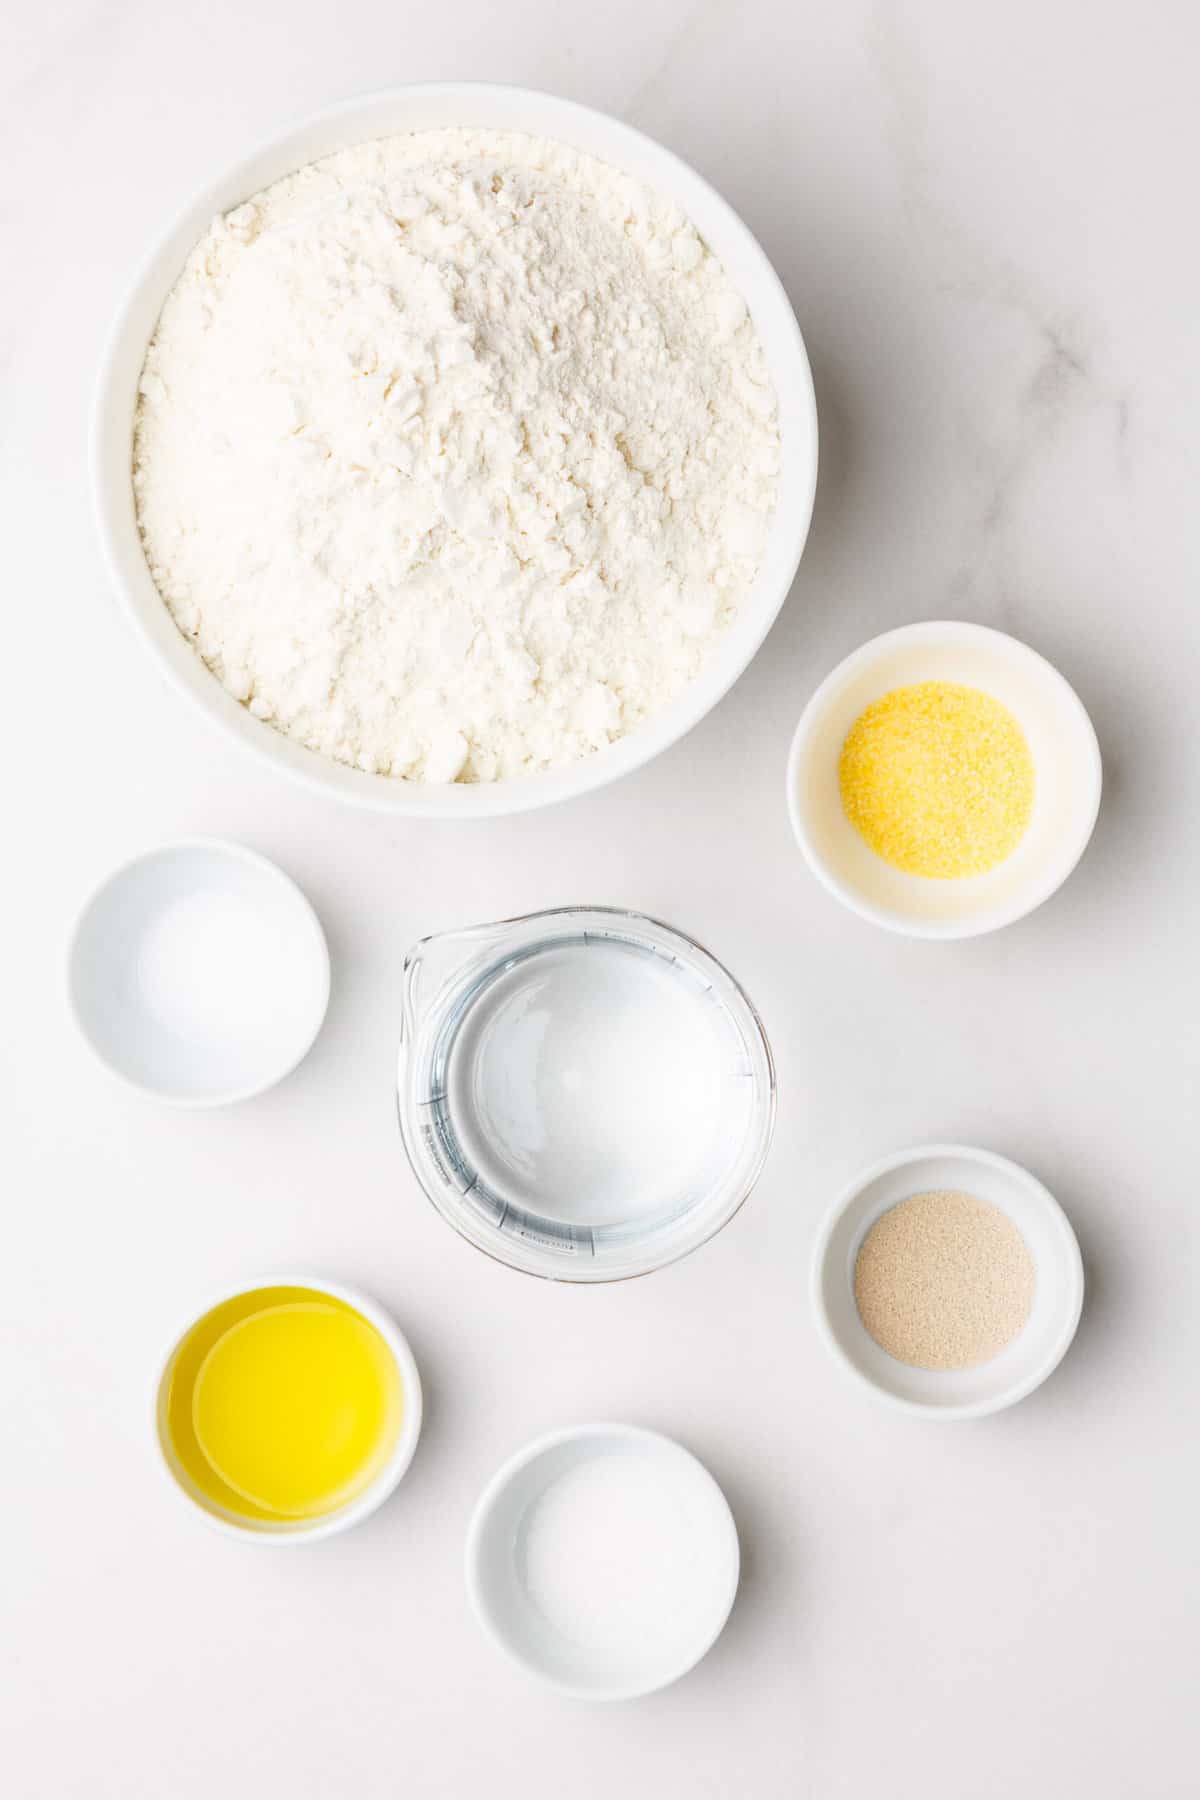 ingredients to make homemade pizza dough